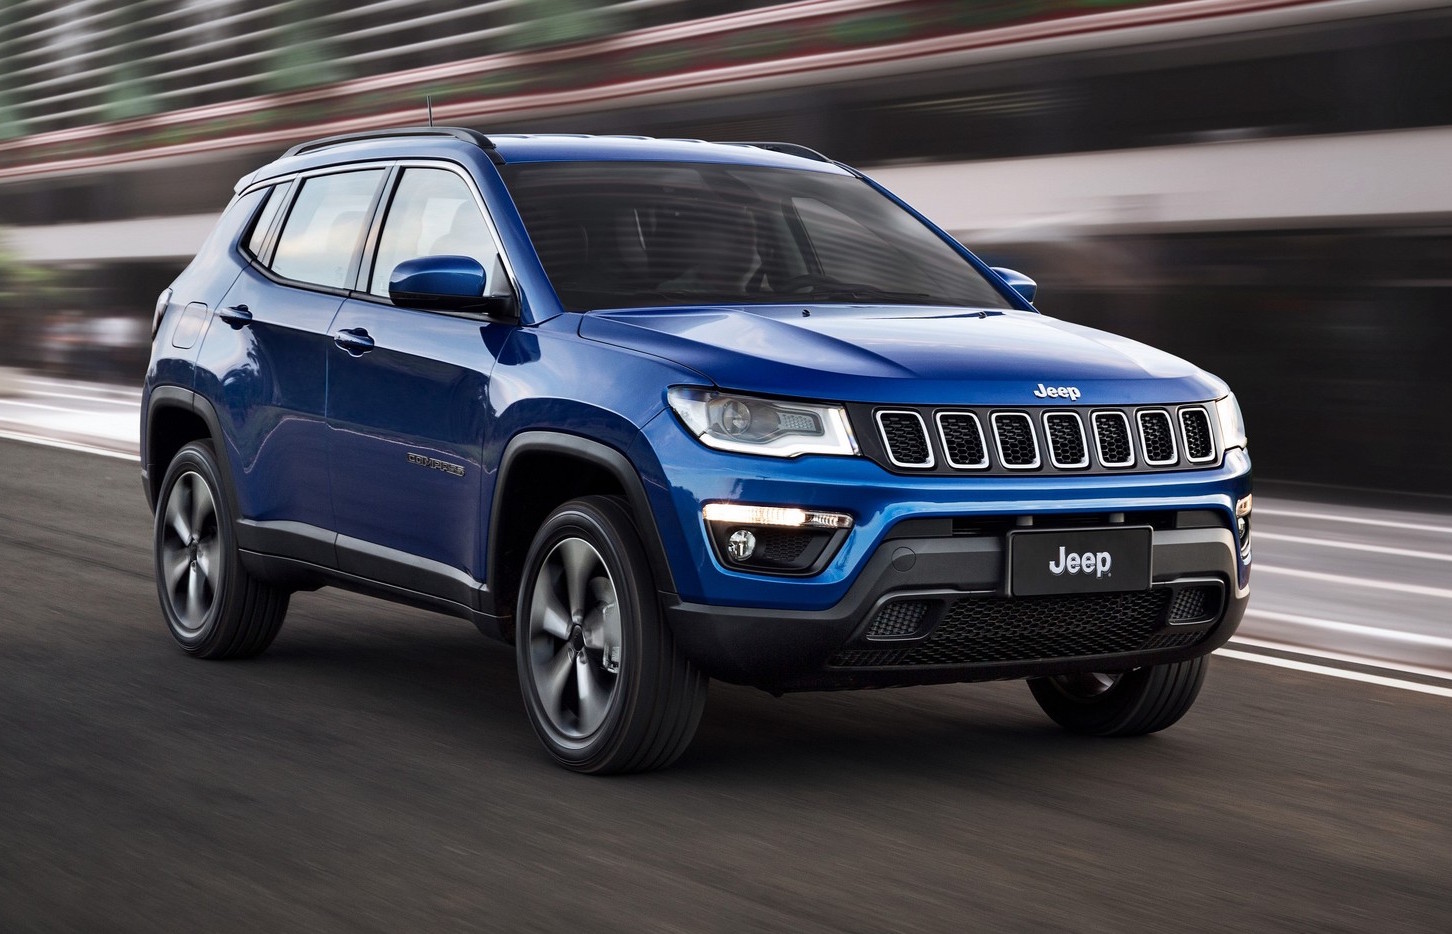 2017 Jeep Compass officially revealed